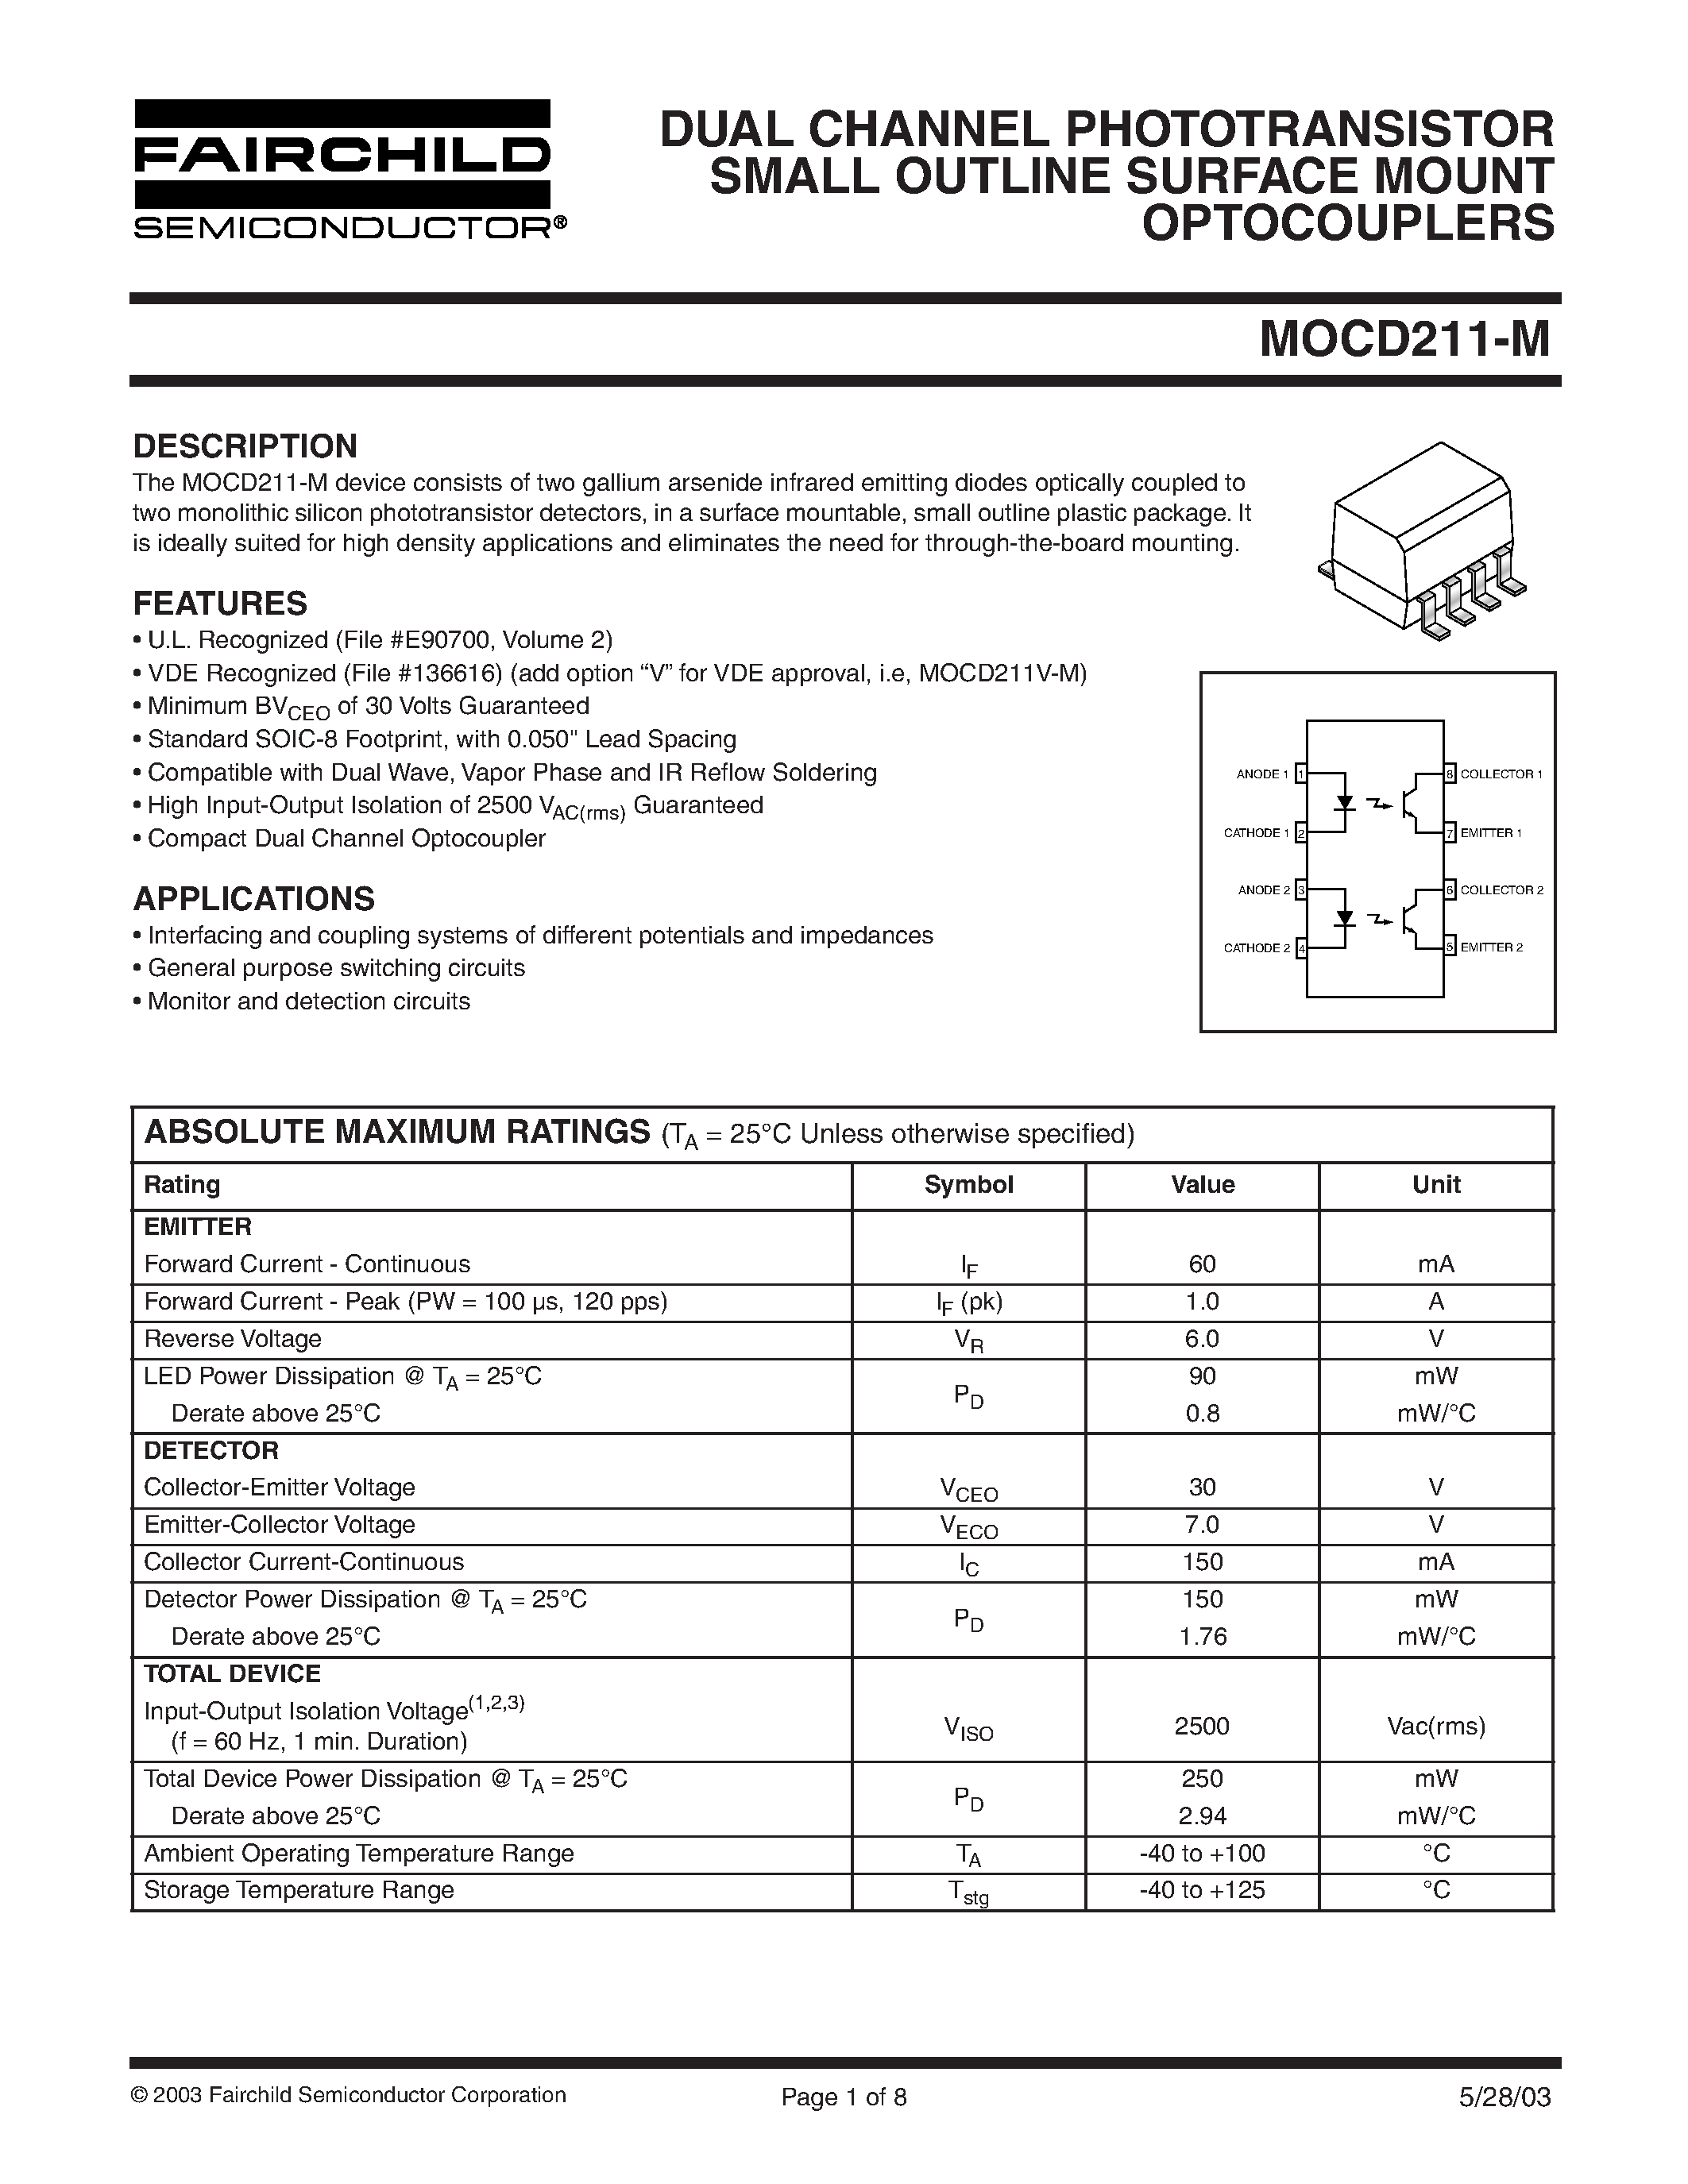 Datasheet MOCD211-M - DUAL CHANNEL PHOTOTRANSISTOR SMALL OUTLINE SURFACE MOUNT OPTOCOUPLERS page 1